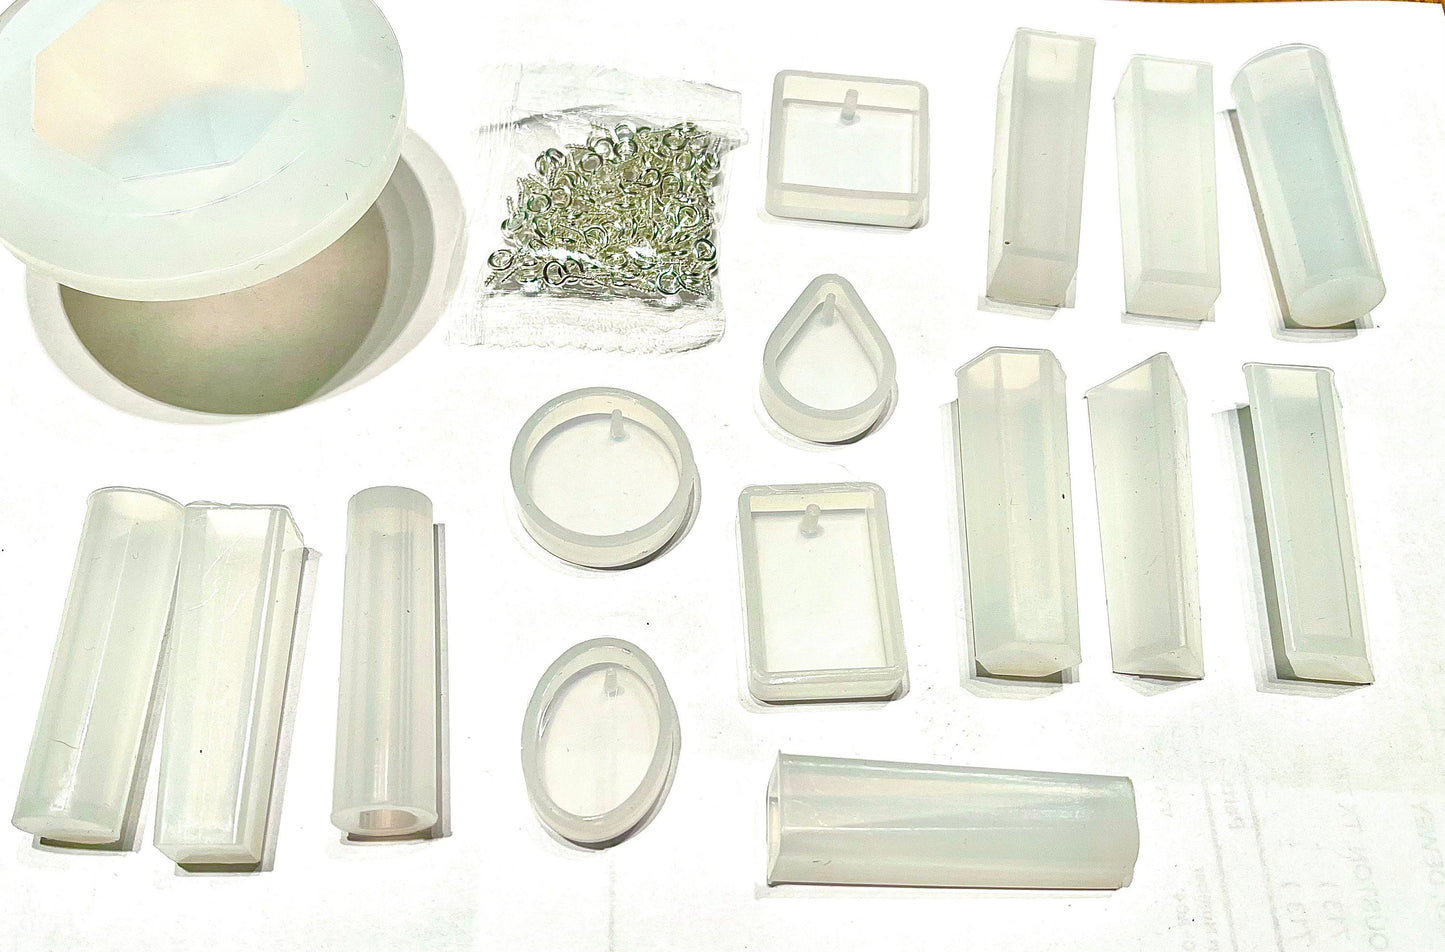 Small Crystal Pendant Gem Resin Mold Kit - 115pc Silicone Mold for Resin, Candles, and Soaps